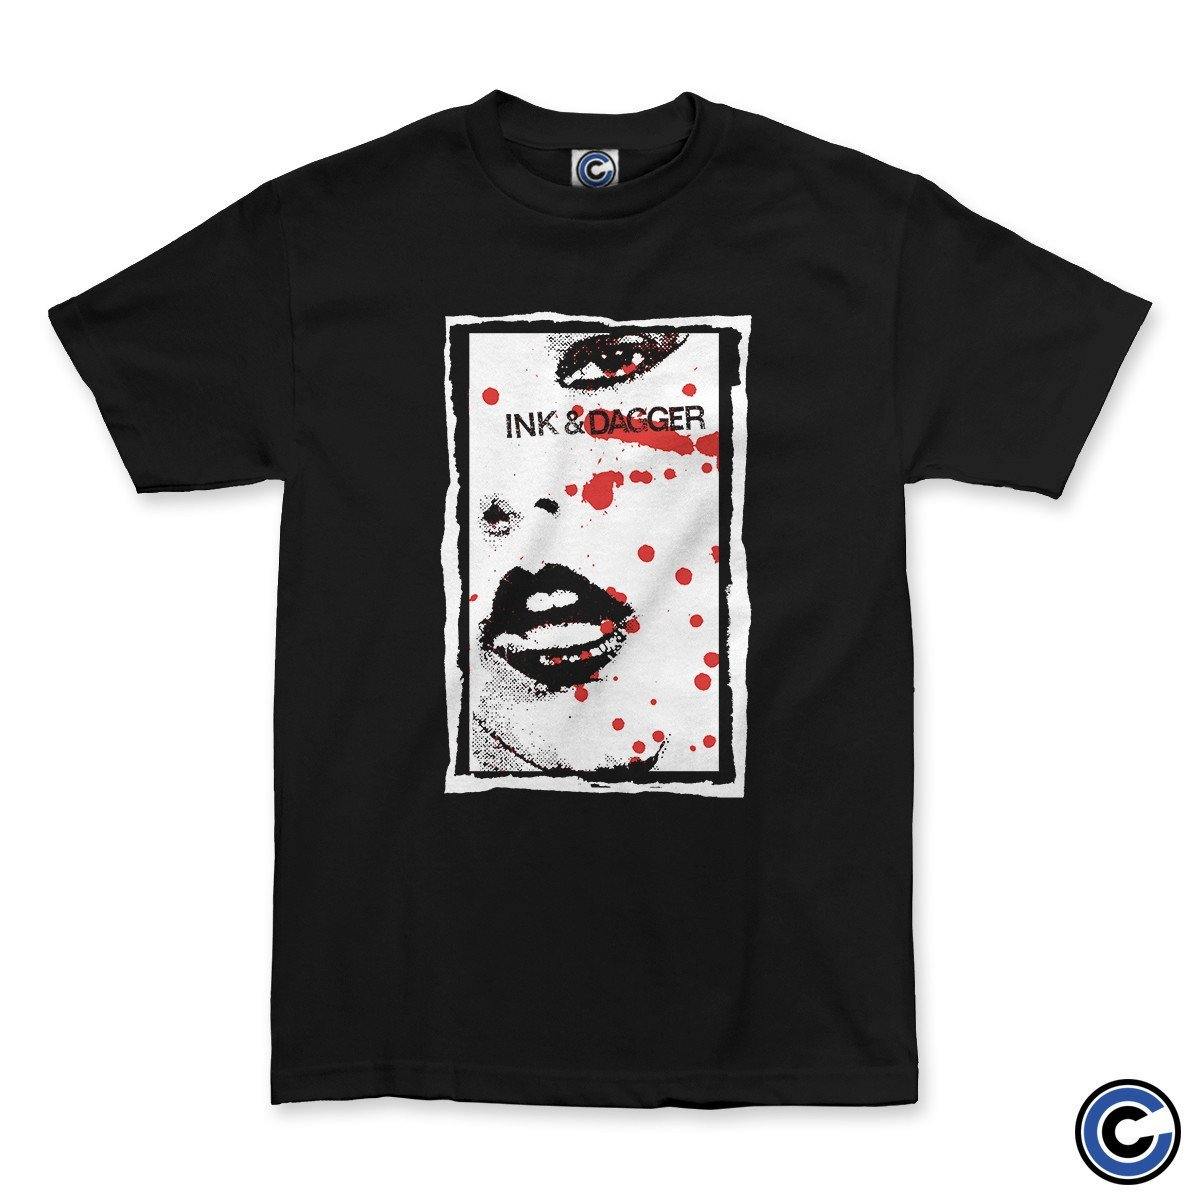 Buy – Ink and Dagger "Blood" Shirt – Band & Music Merch – Cold Cuts Merch